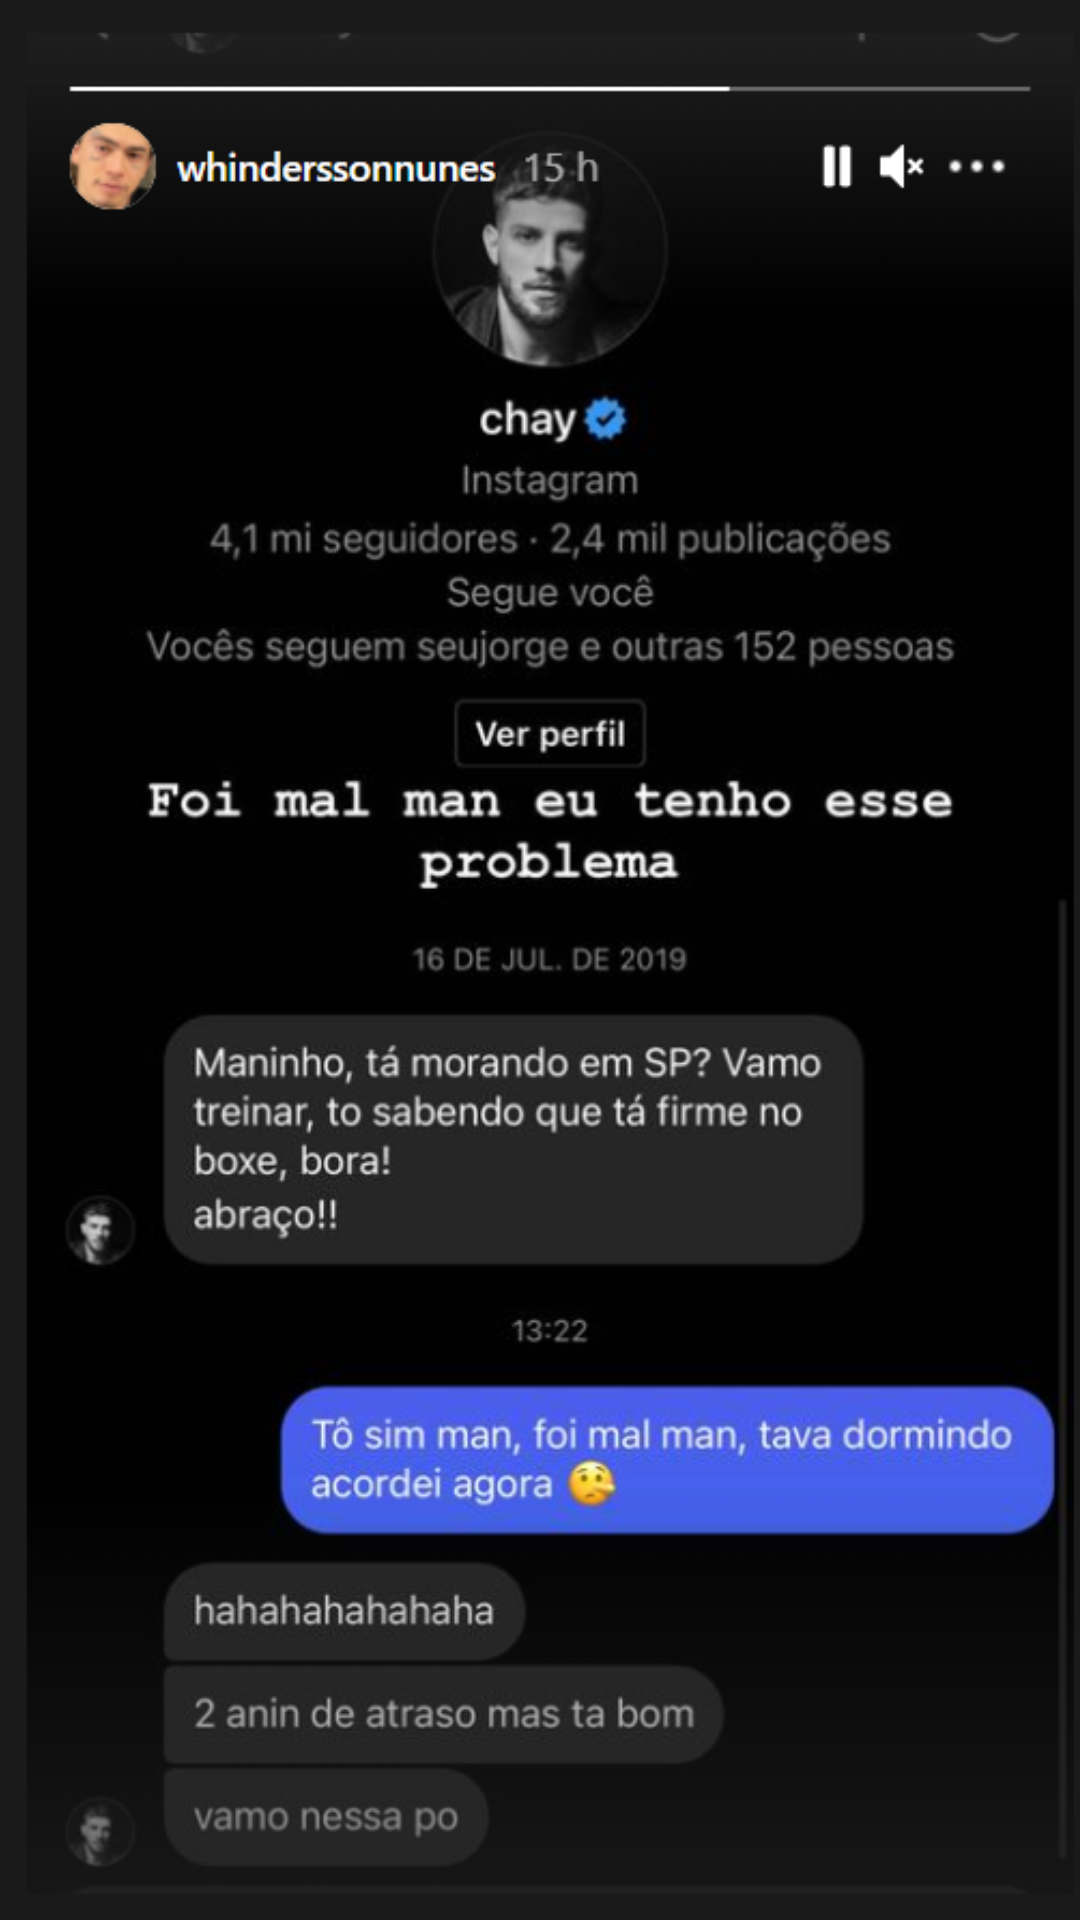 Story Whindersson Nunes